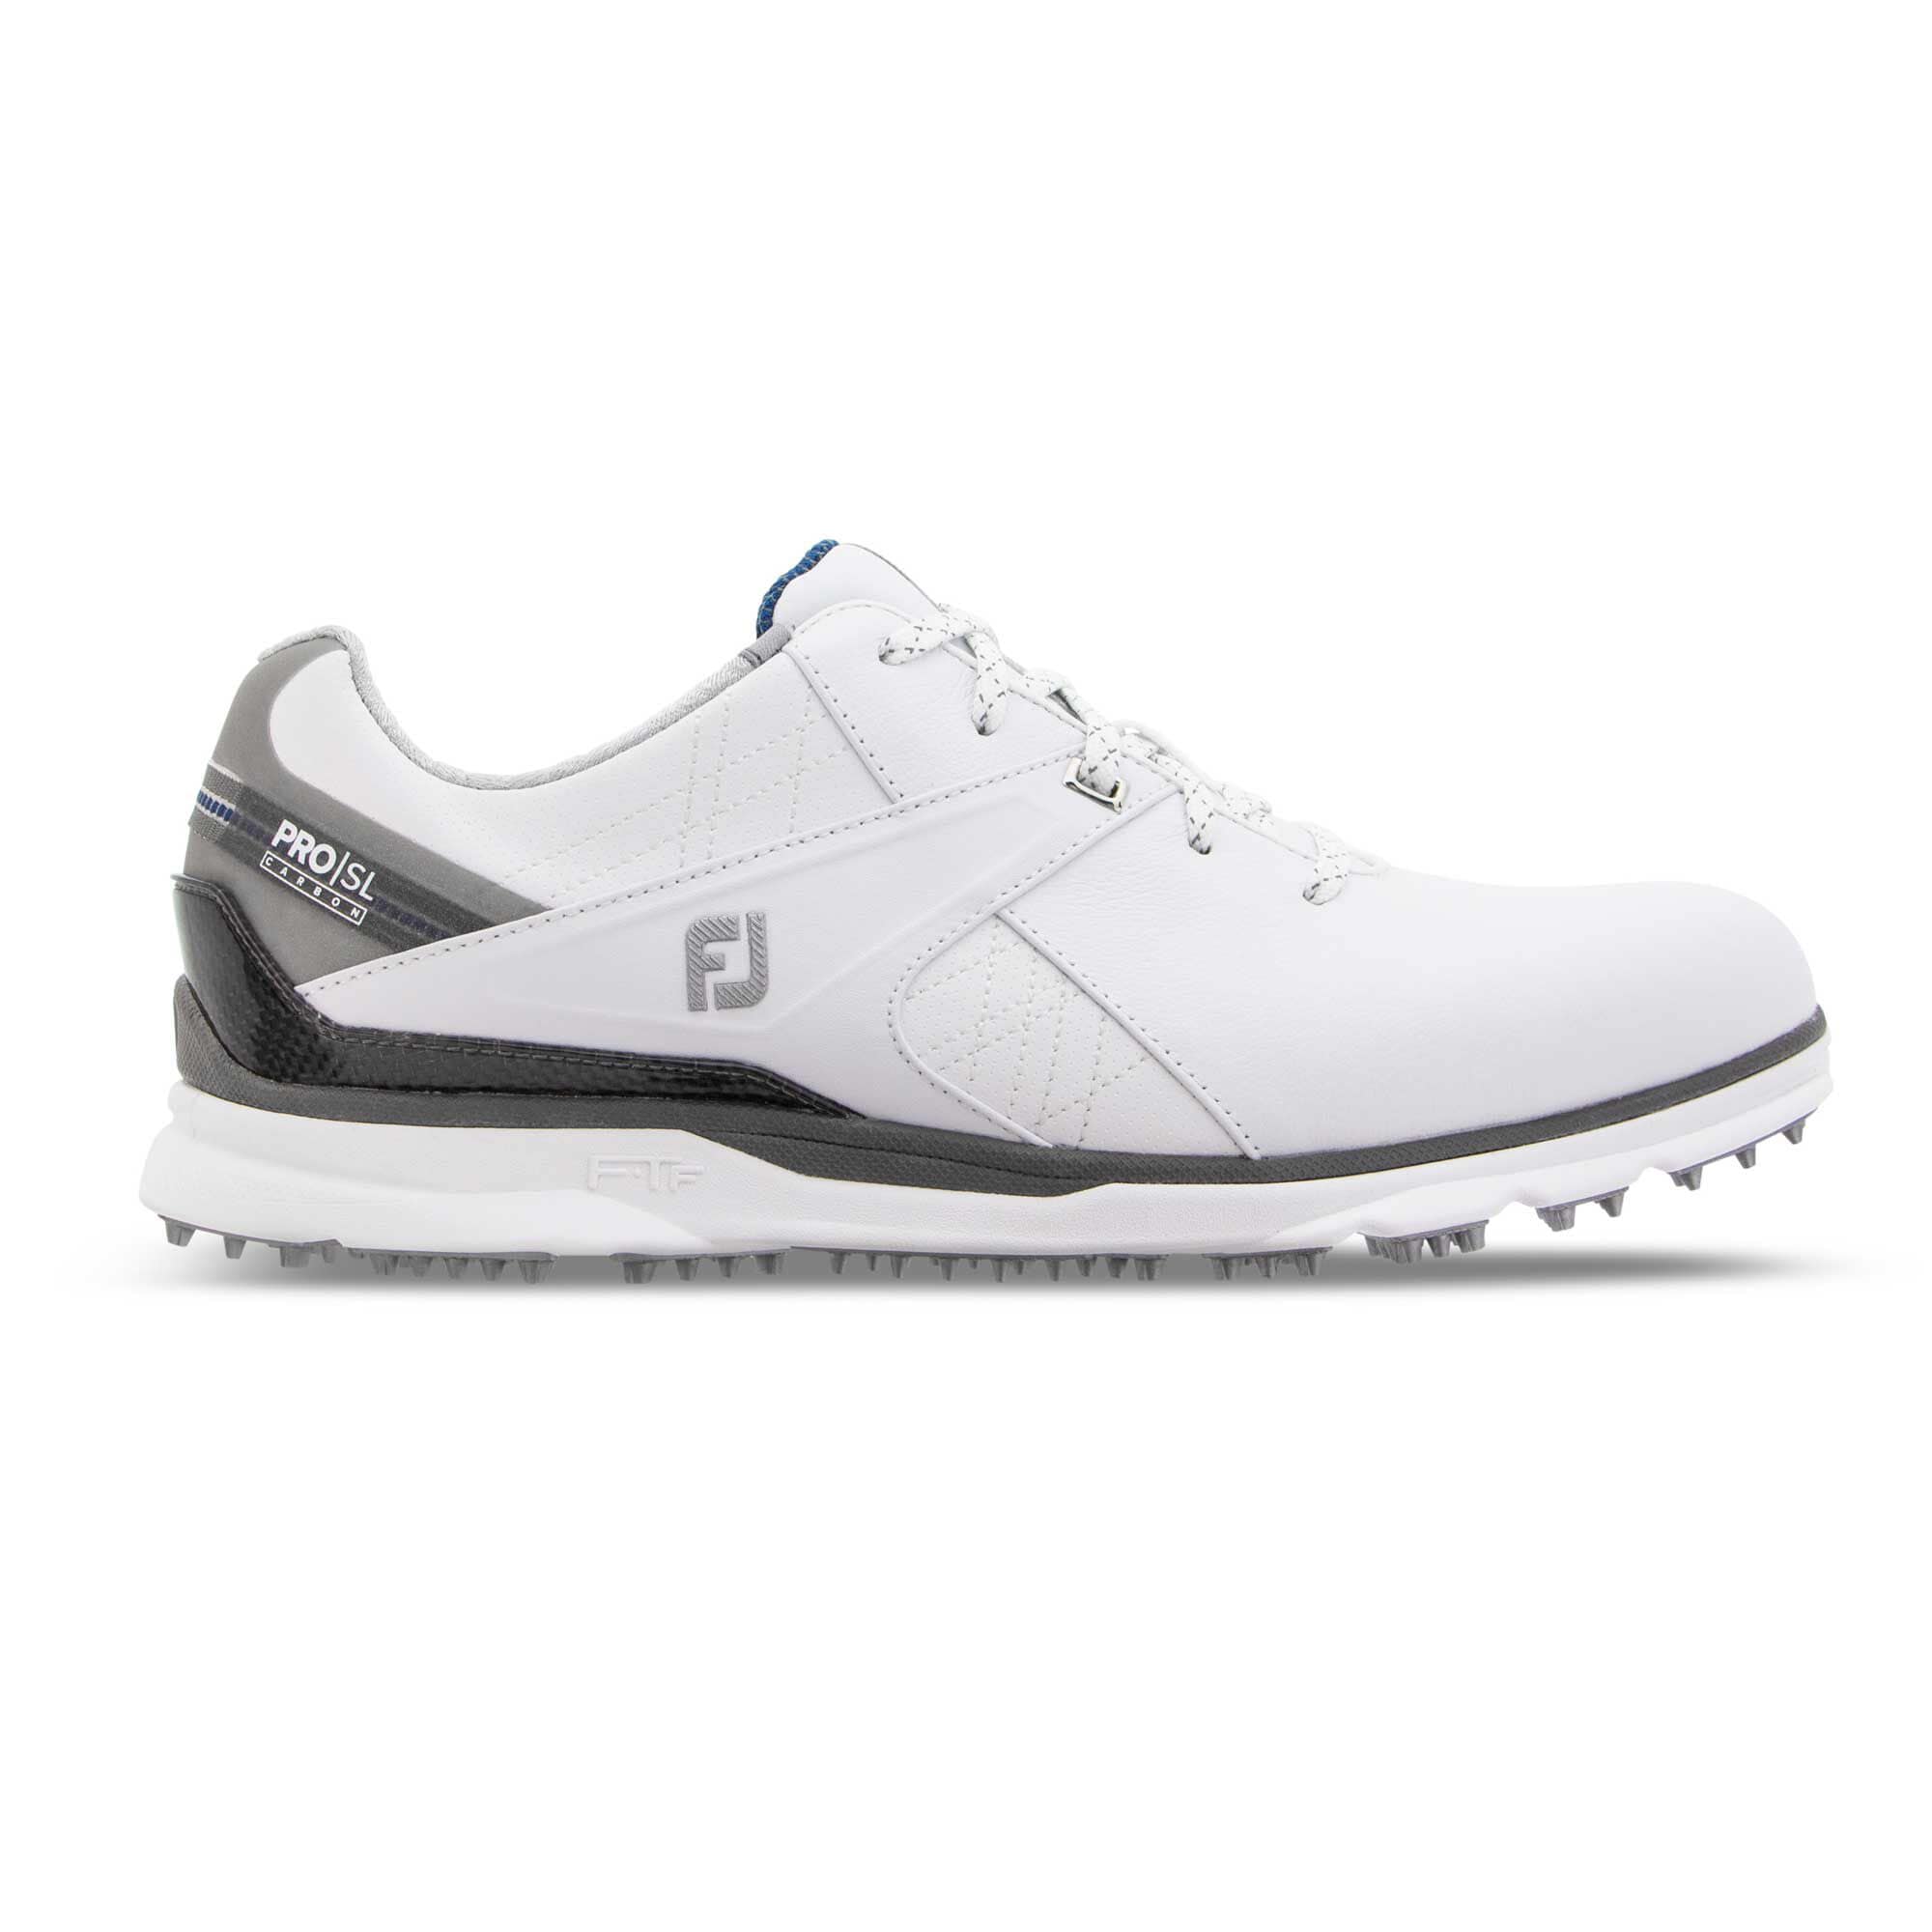 mens spikeless golf shoes canada